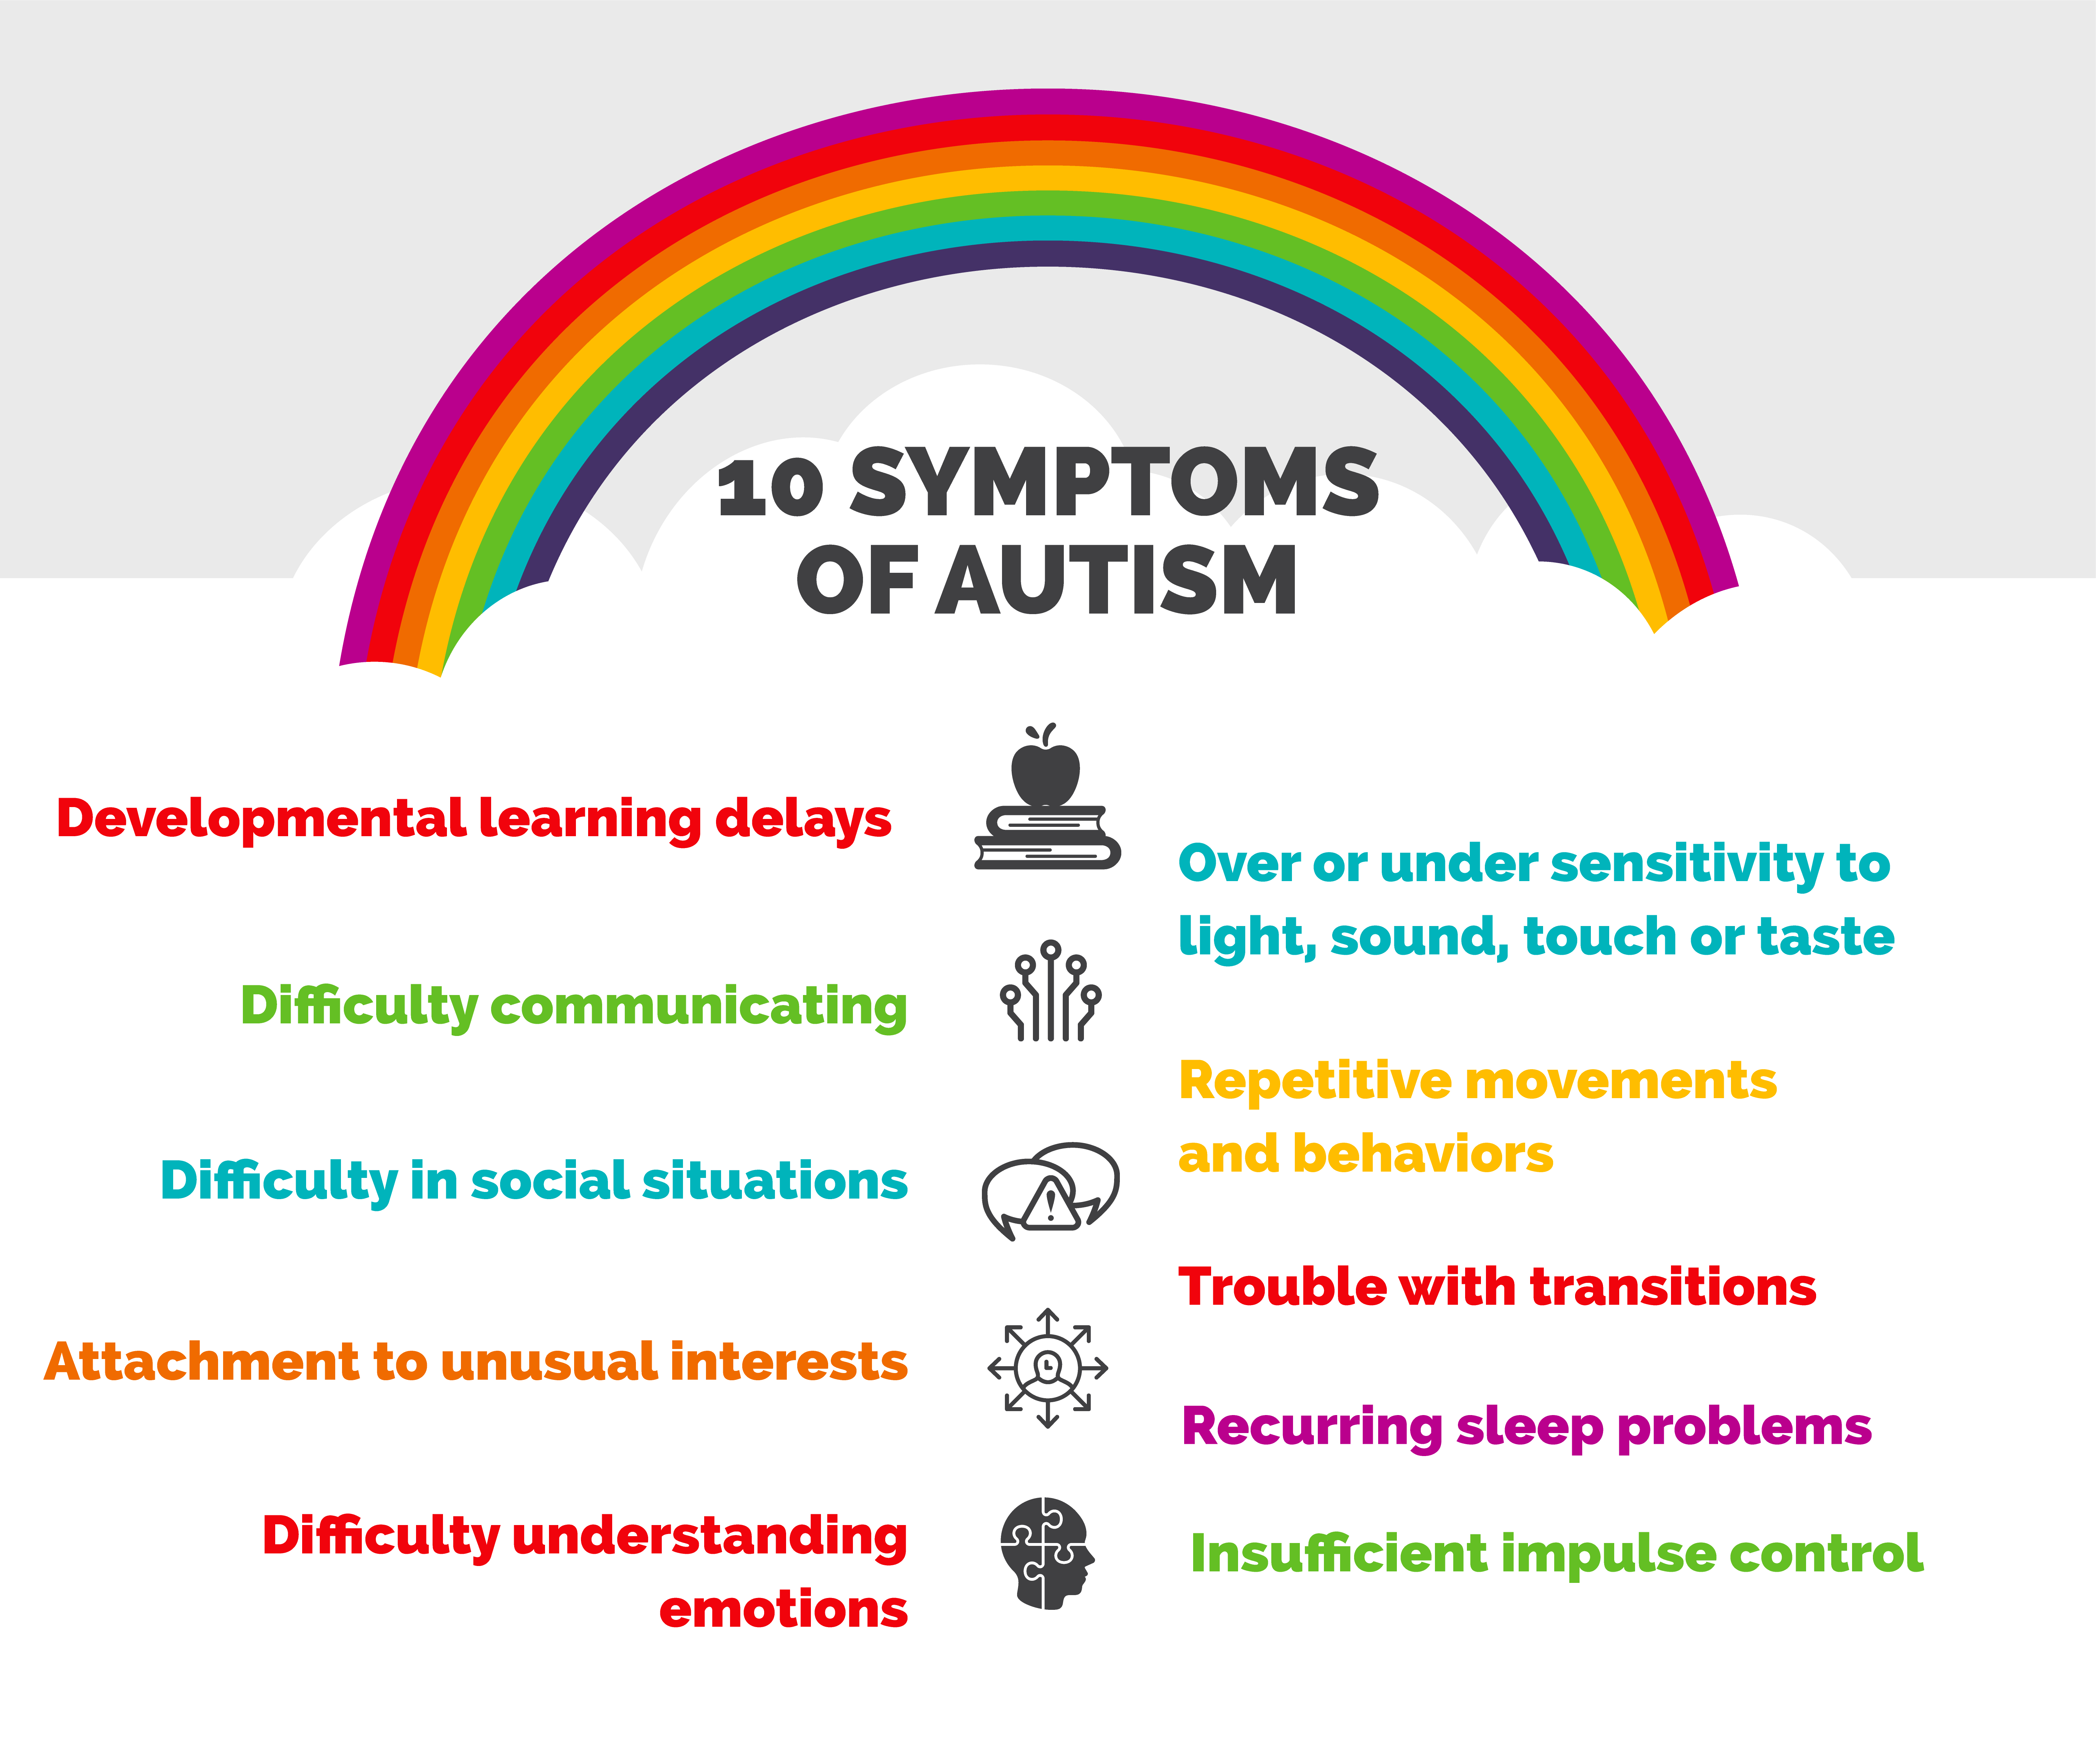 Signs Of Autism In Babies 8 Months Old Very Particular Online Journal